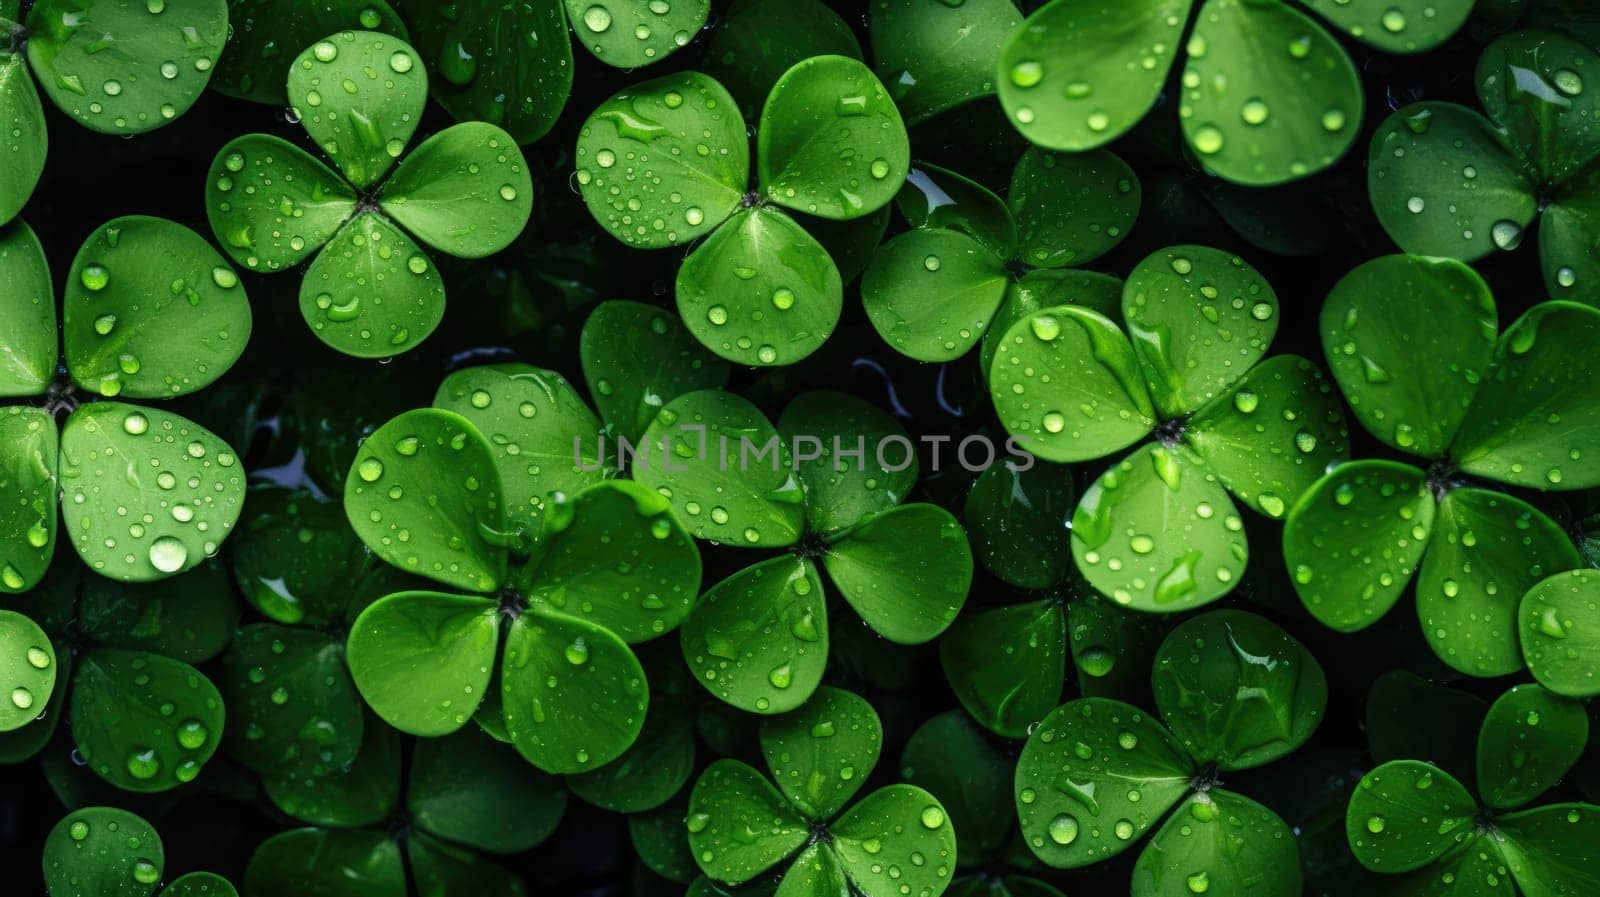 A stunning and vivid scene of a dense field of green four-leaf clovers, perfect for St. Patricks Day or nature-themed designs, providing a sense of freshness and abundance in a harmonious setting.